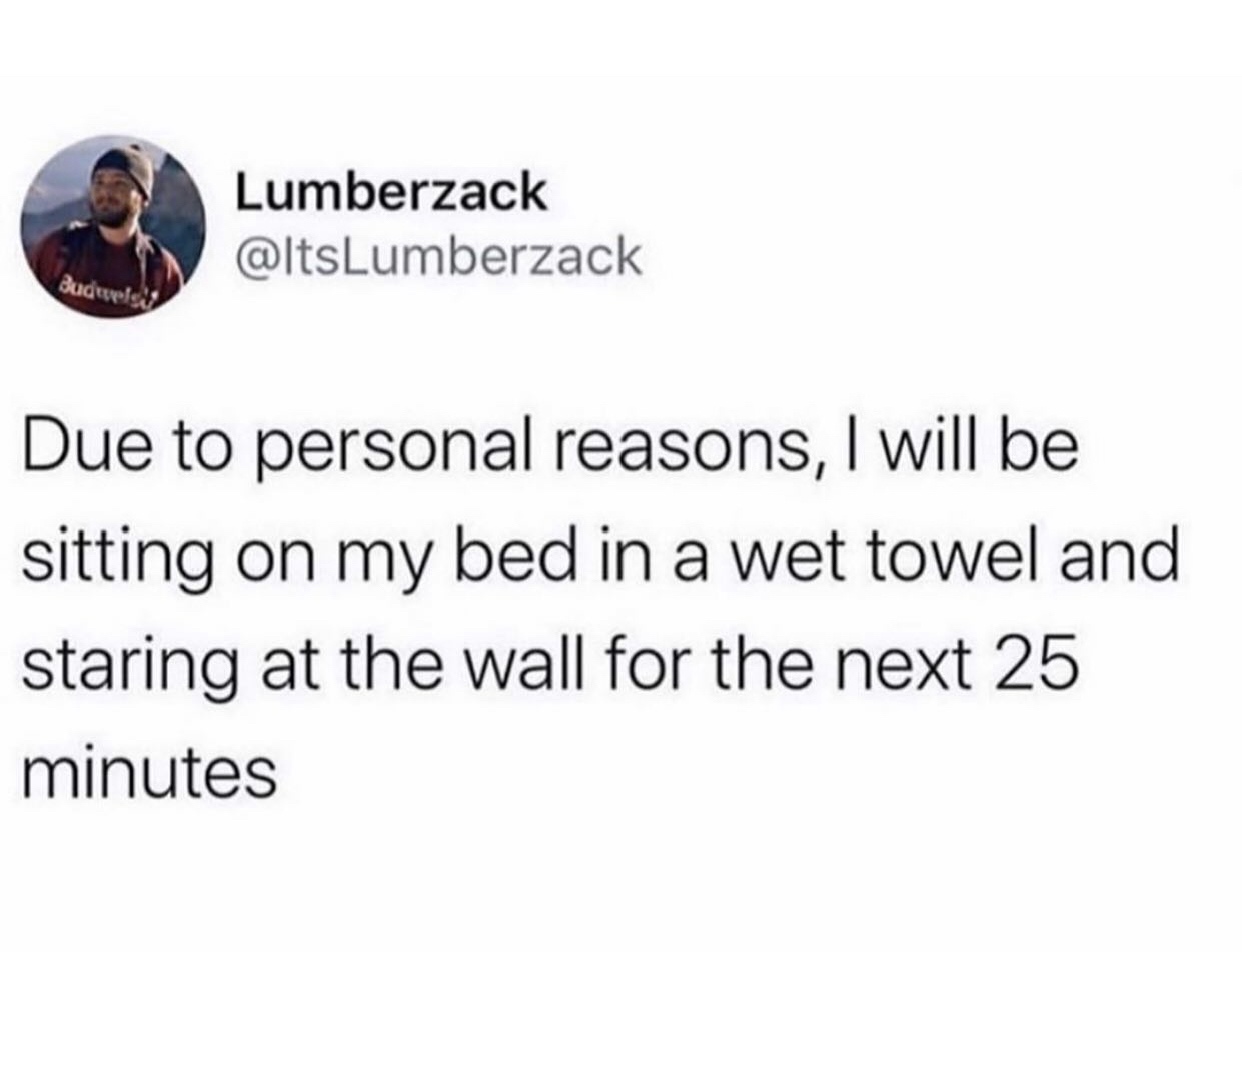 voldetort memes - Lumberzack Buduels Due to personal reasons, I will be sitting on my bed in a wet towel and staring at the wall for the next 25 minutes